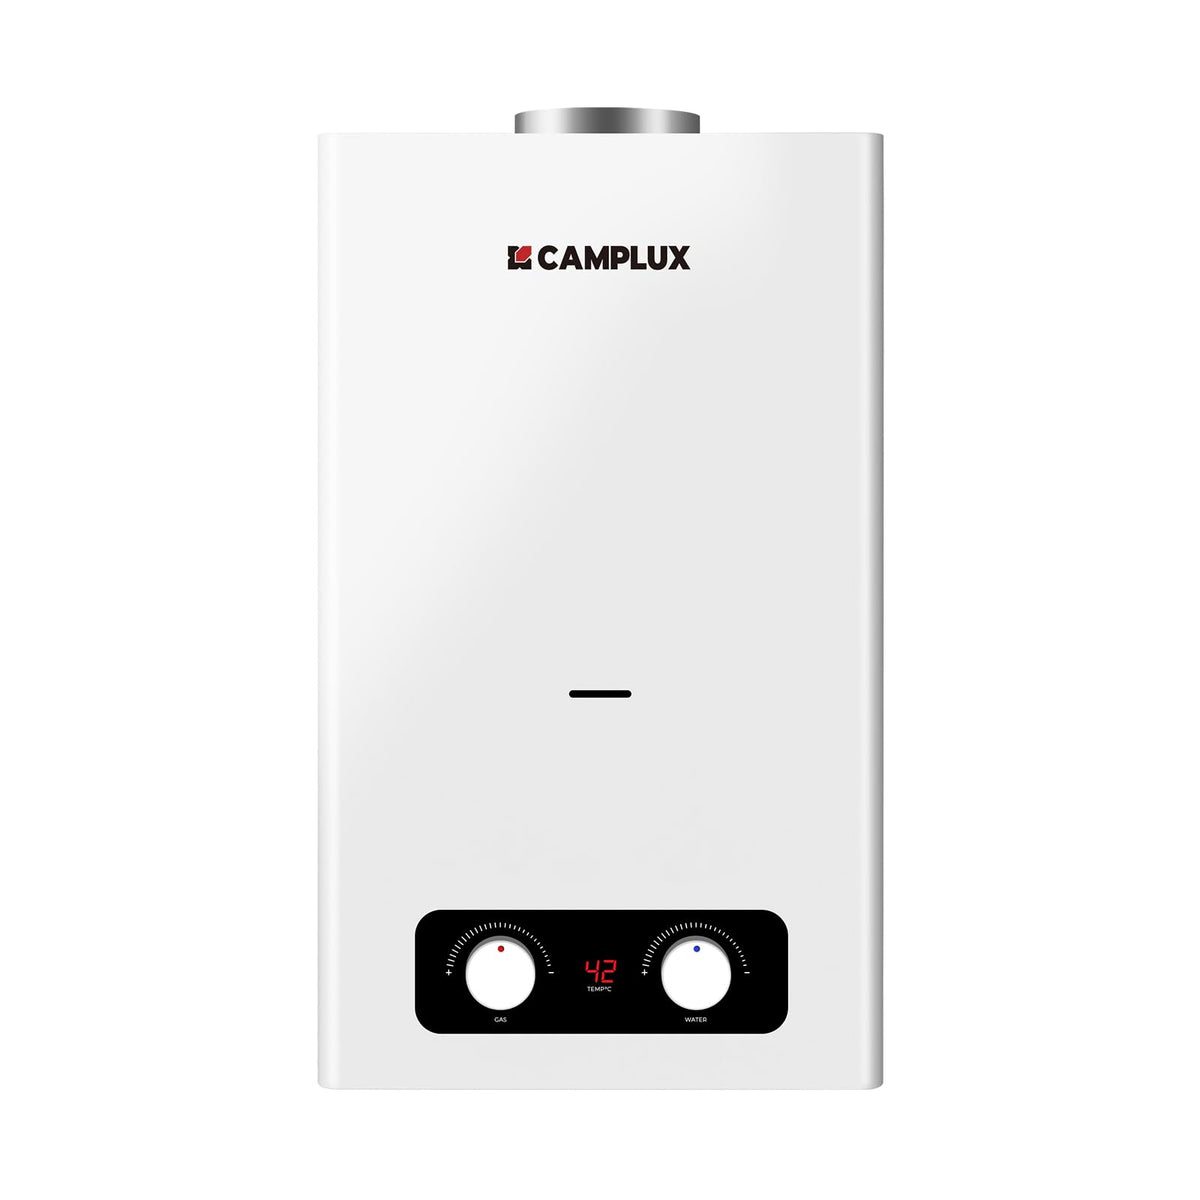 CAMPLUX BY264 Indoor Gas Water Heater 10 litres, Domestic Instantaneous LPG Shower, for Household, Butane/Propane, 3V [Energy Class A+]